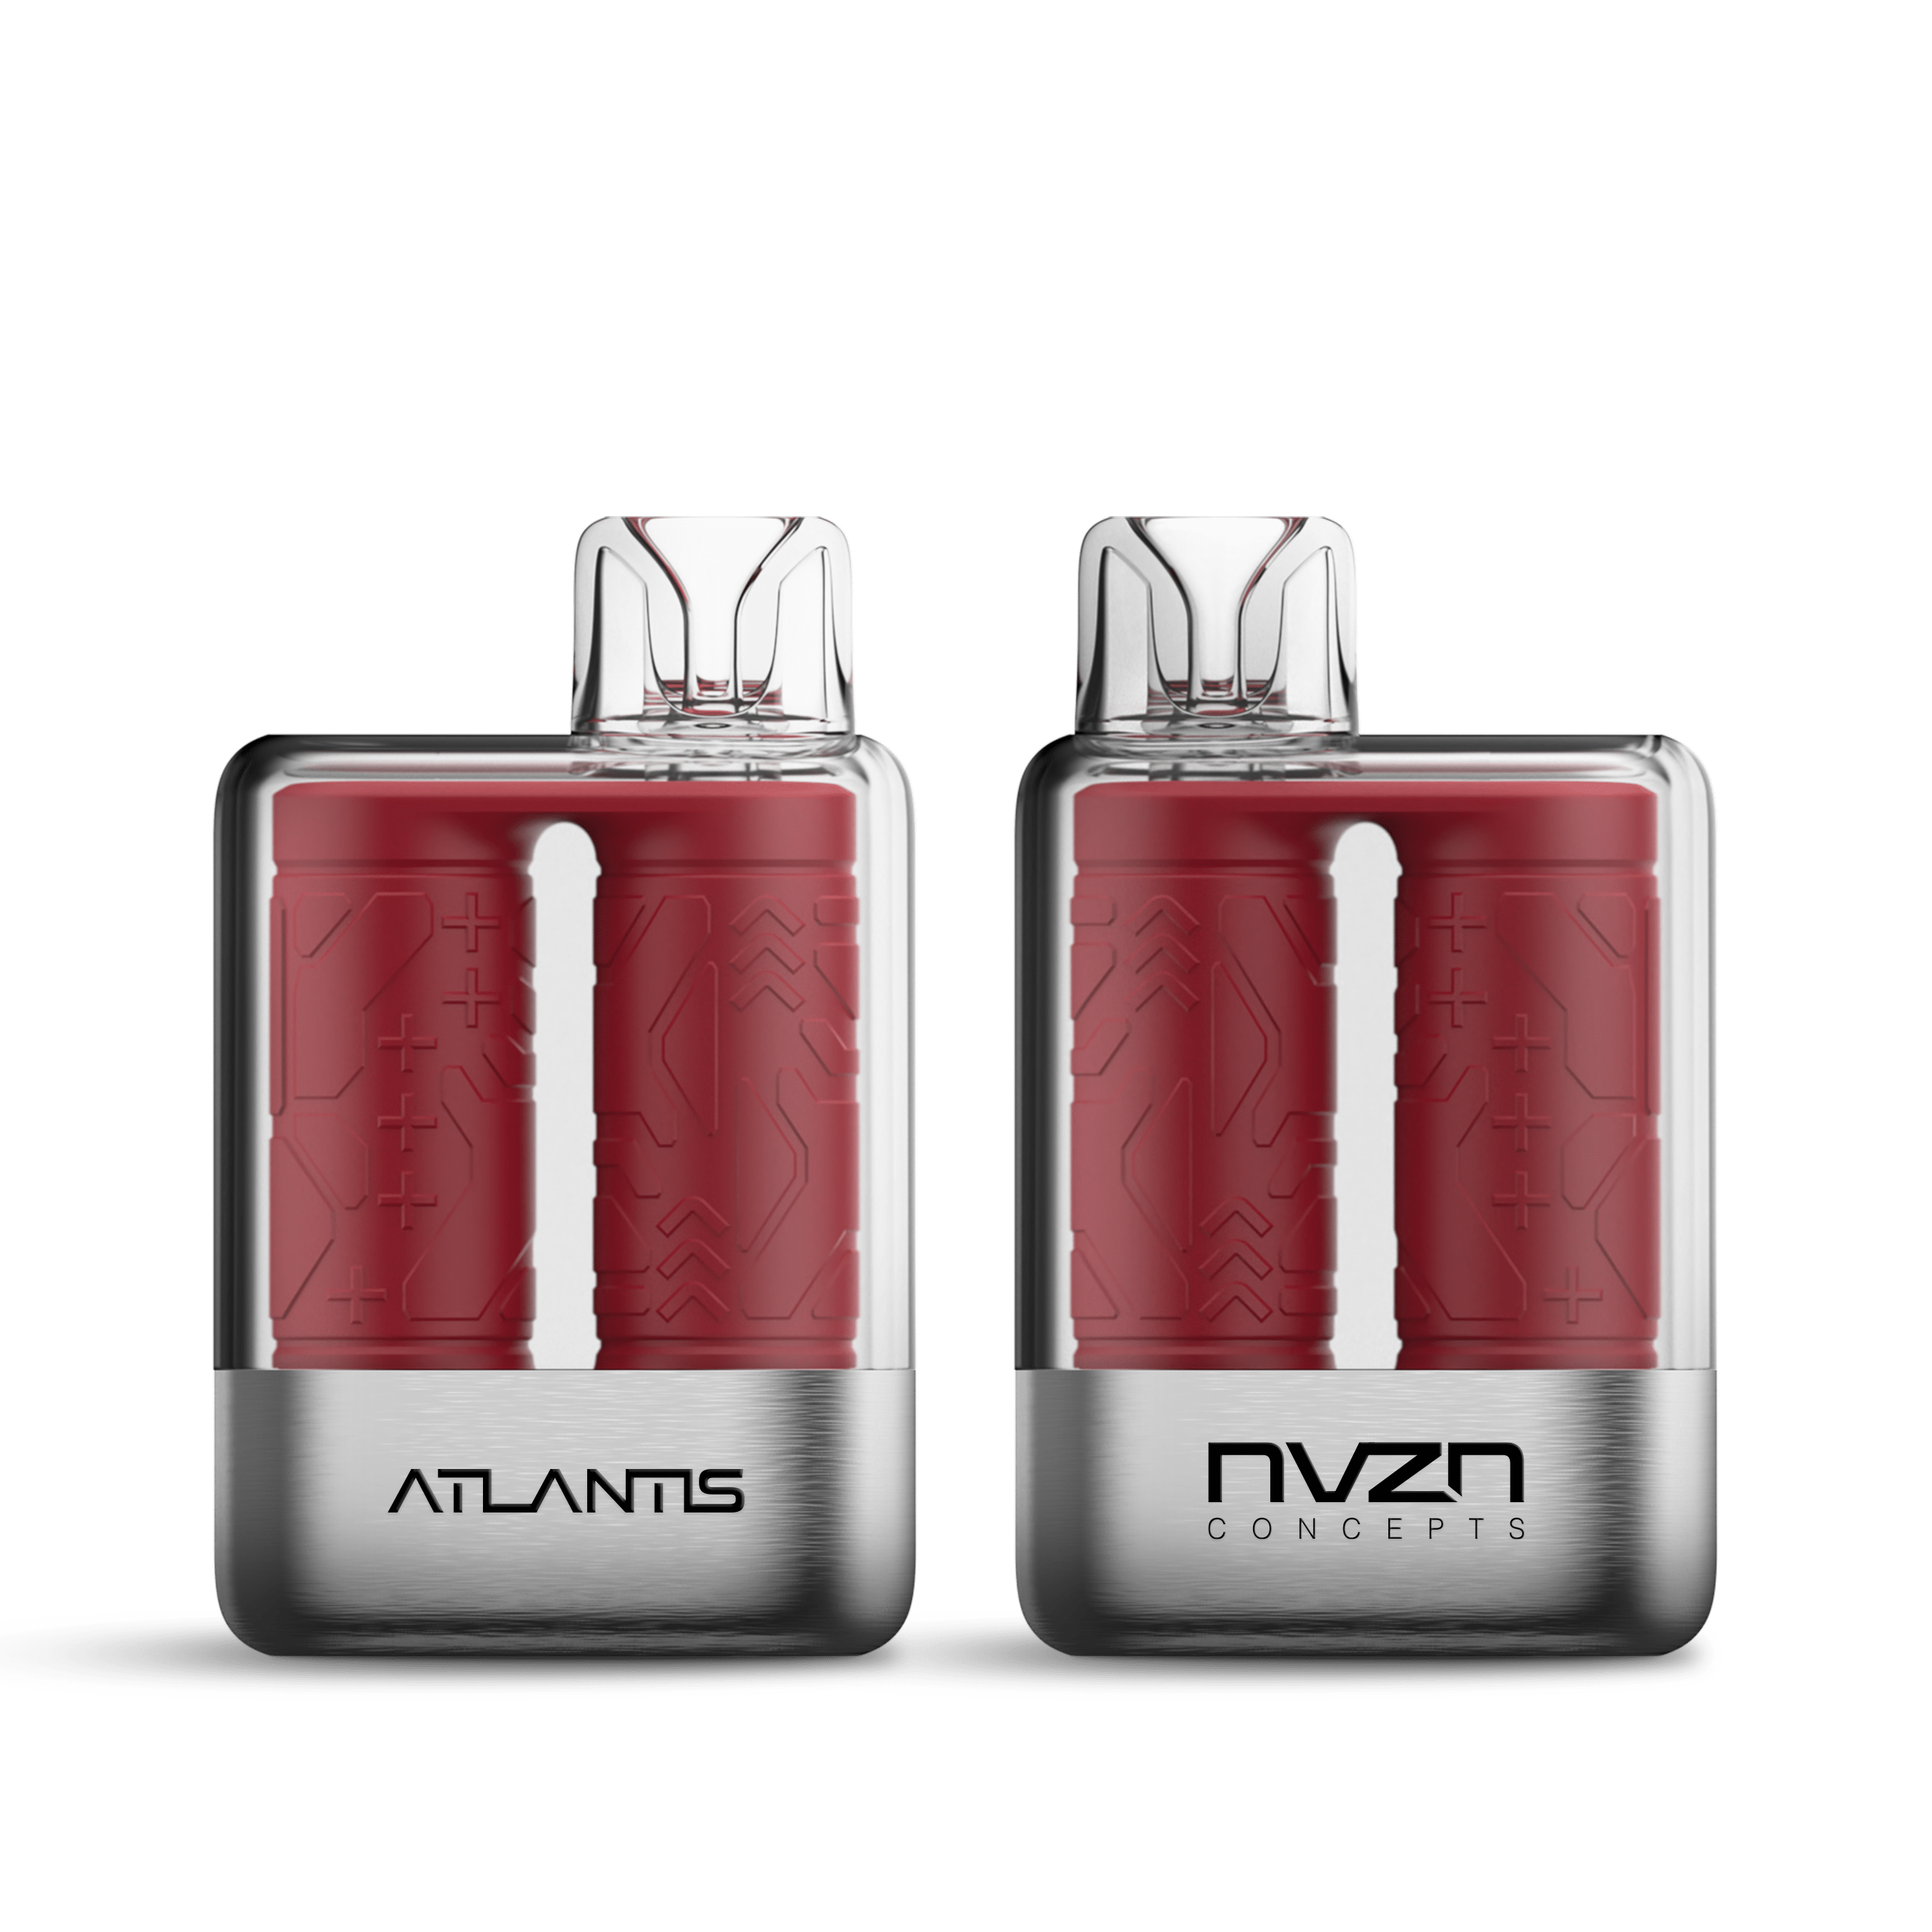 Atlantis by NZVN 8000 - Strawberry Watermelon Twist Disposable Vape available on Canada online vape shop